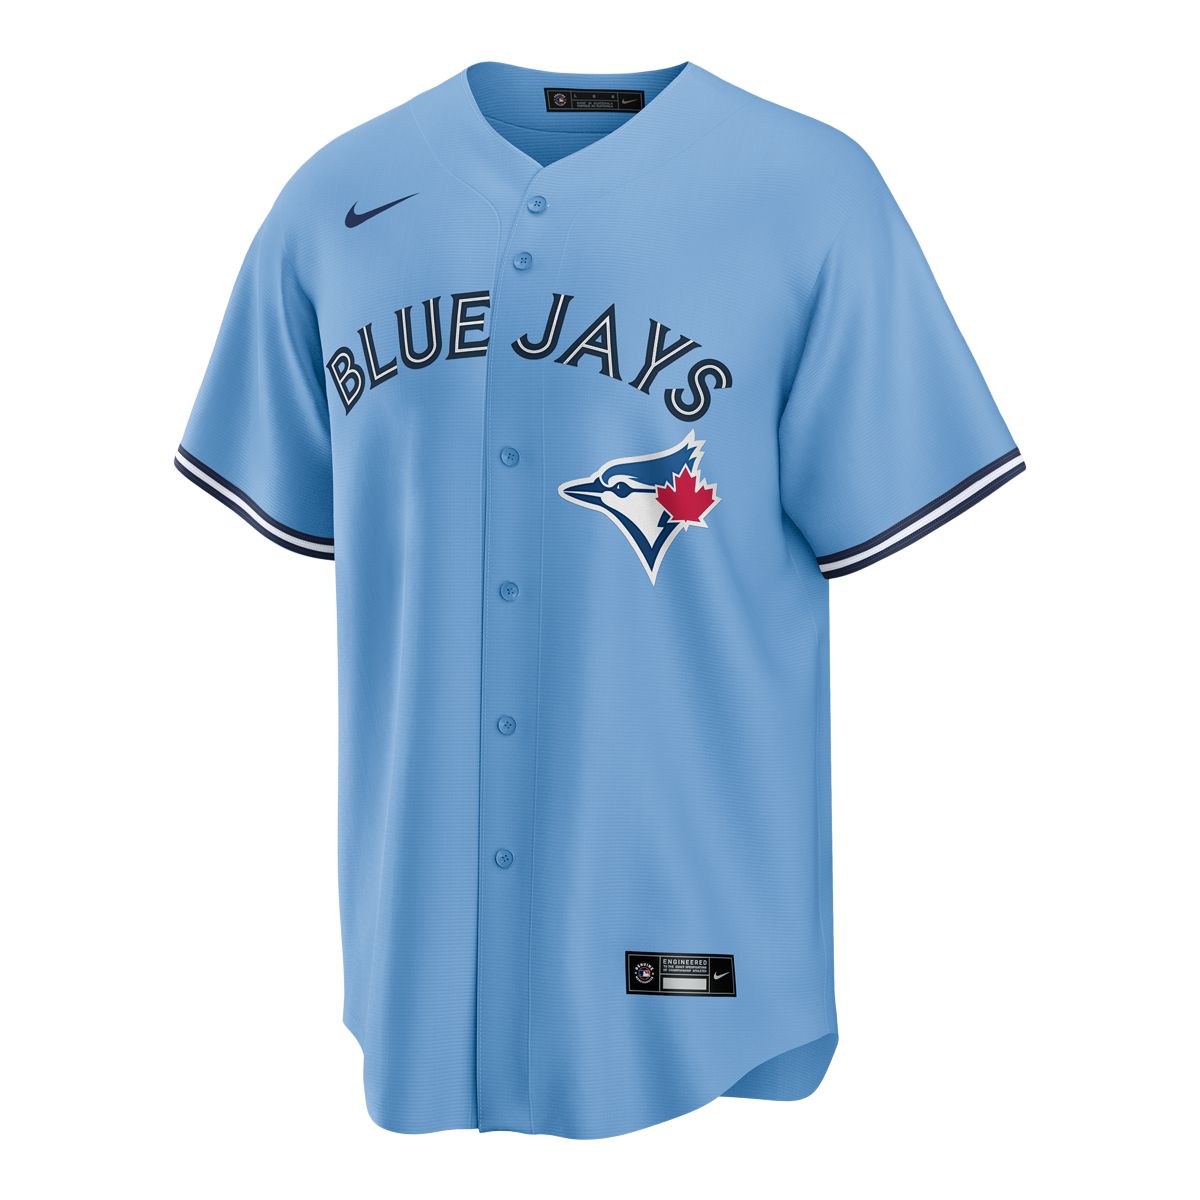 Toronto Blue Jays Youth Replica Home Jersey